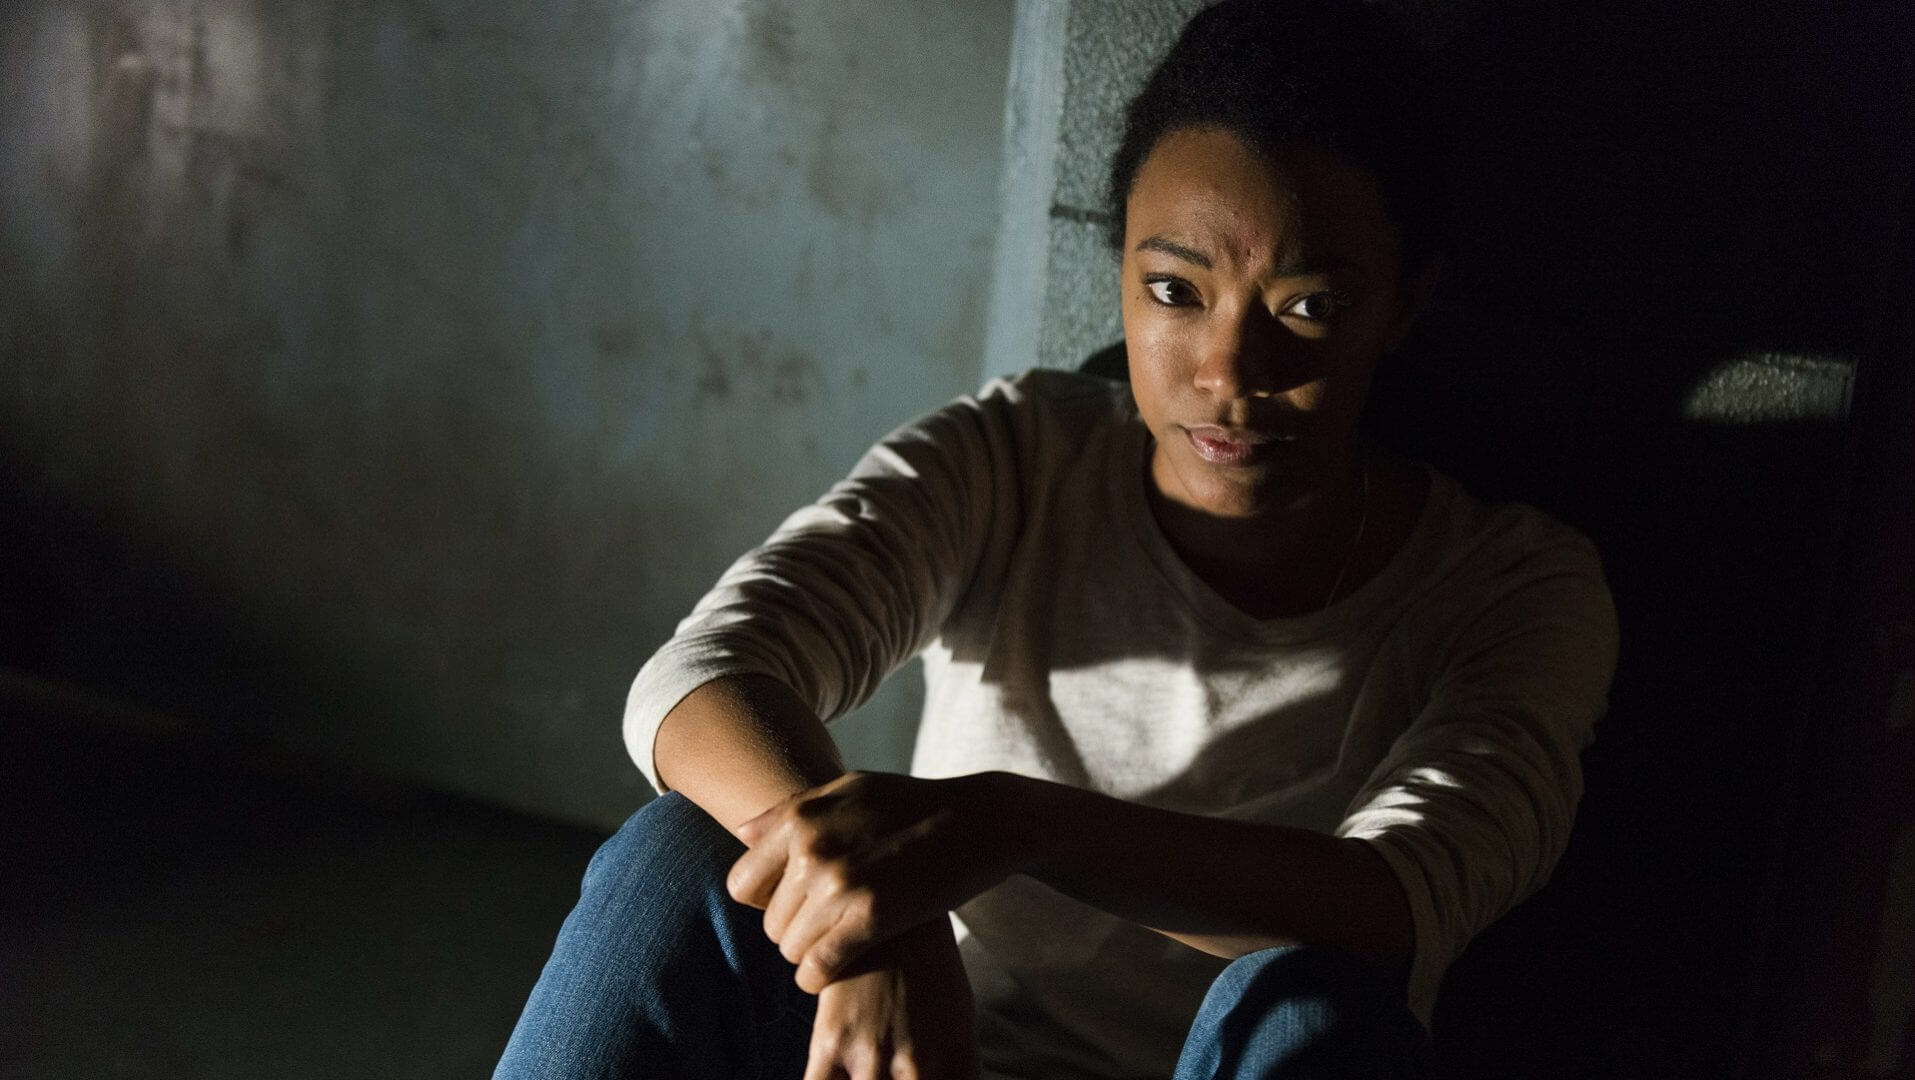 Sasha in Captivity at the Sanctuary on the Walking Dead